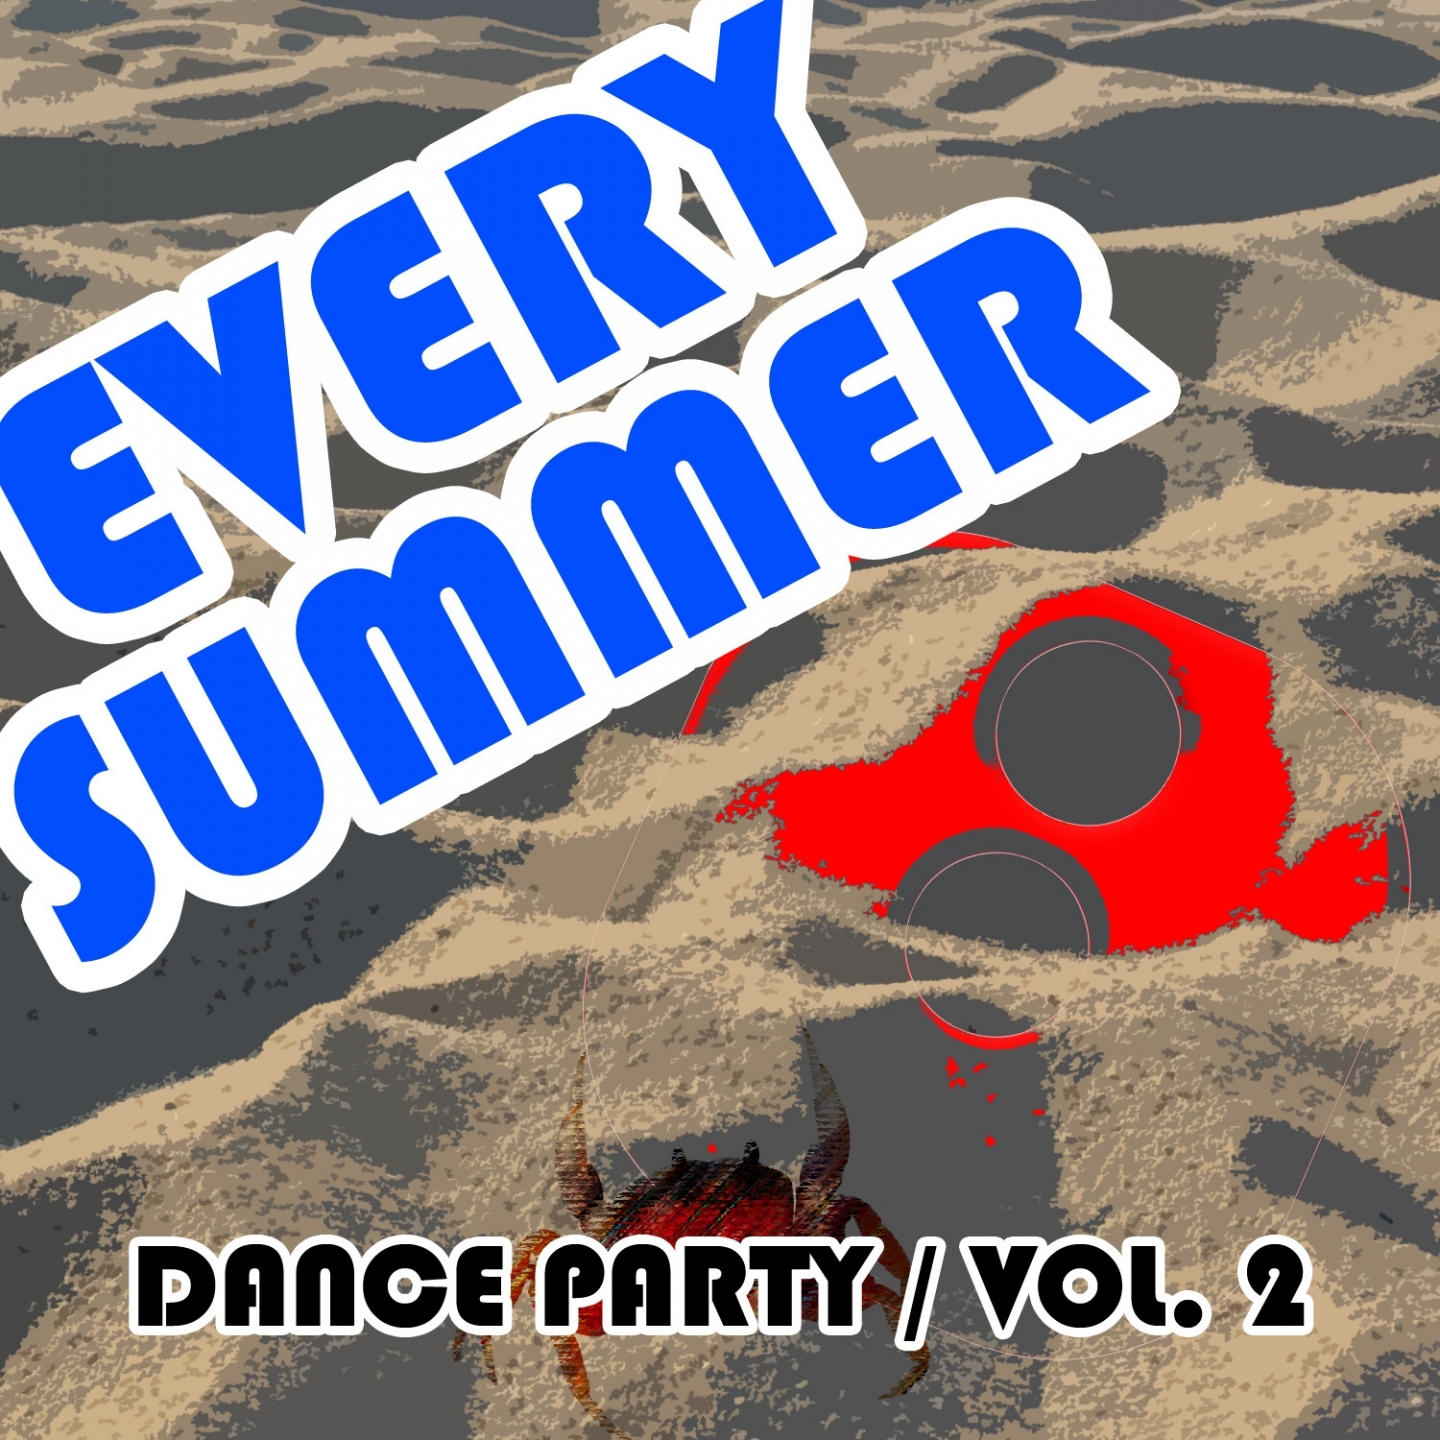 Every Summer, Vol. 2 (Dance Party)